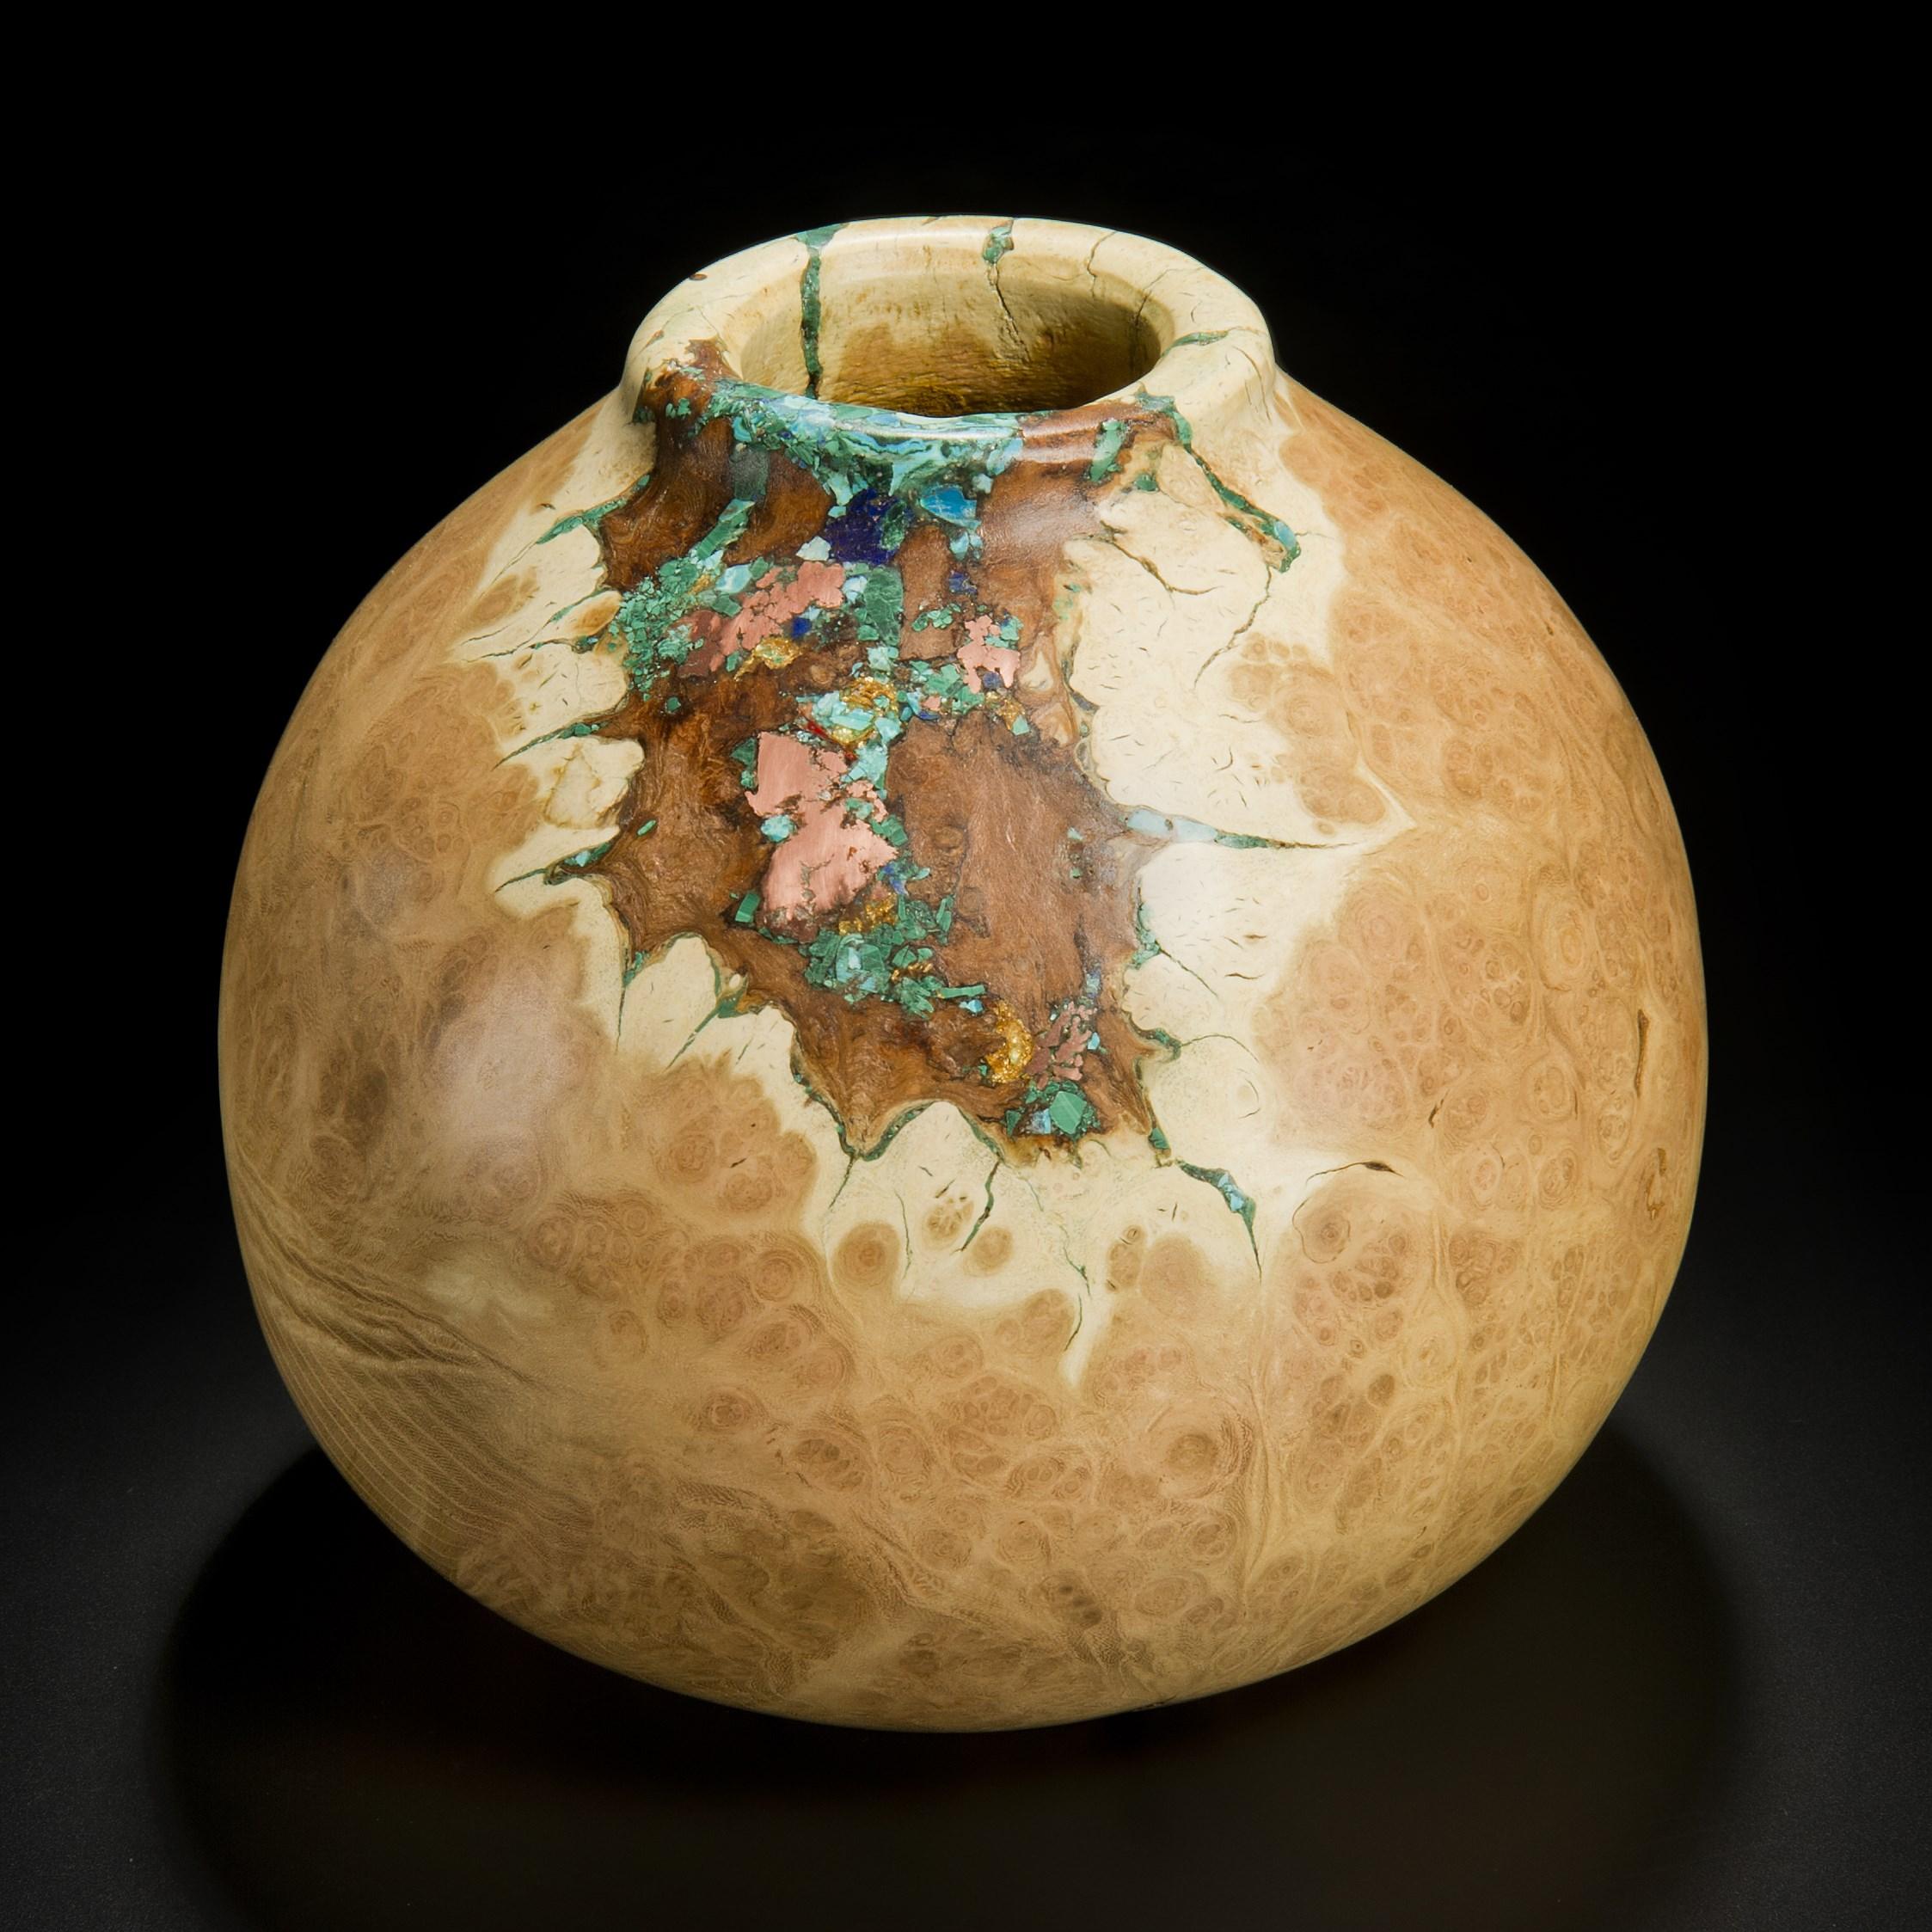 ‘Earthly Treasures No 25’ is a unique sculptural bowl by the British artist, Morrison Thomas. It is made from burred Acacia inlaid with Native Copper, Malachite, Gold, Chrysocolla & Turquoise.

Morrison turns beautiful wooden spheres from damaged